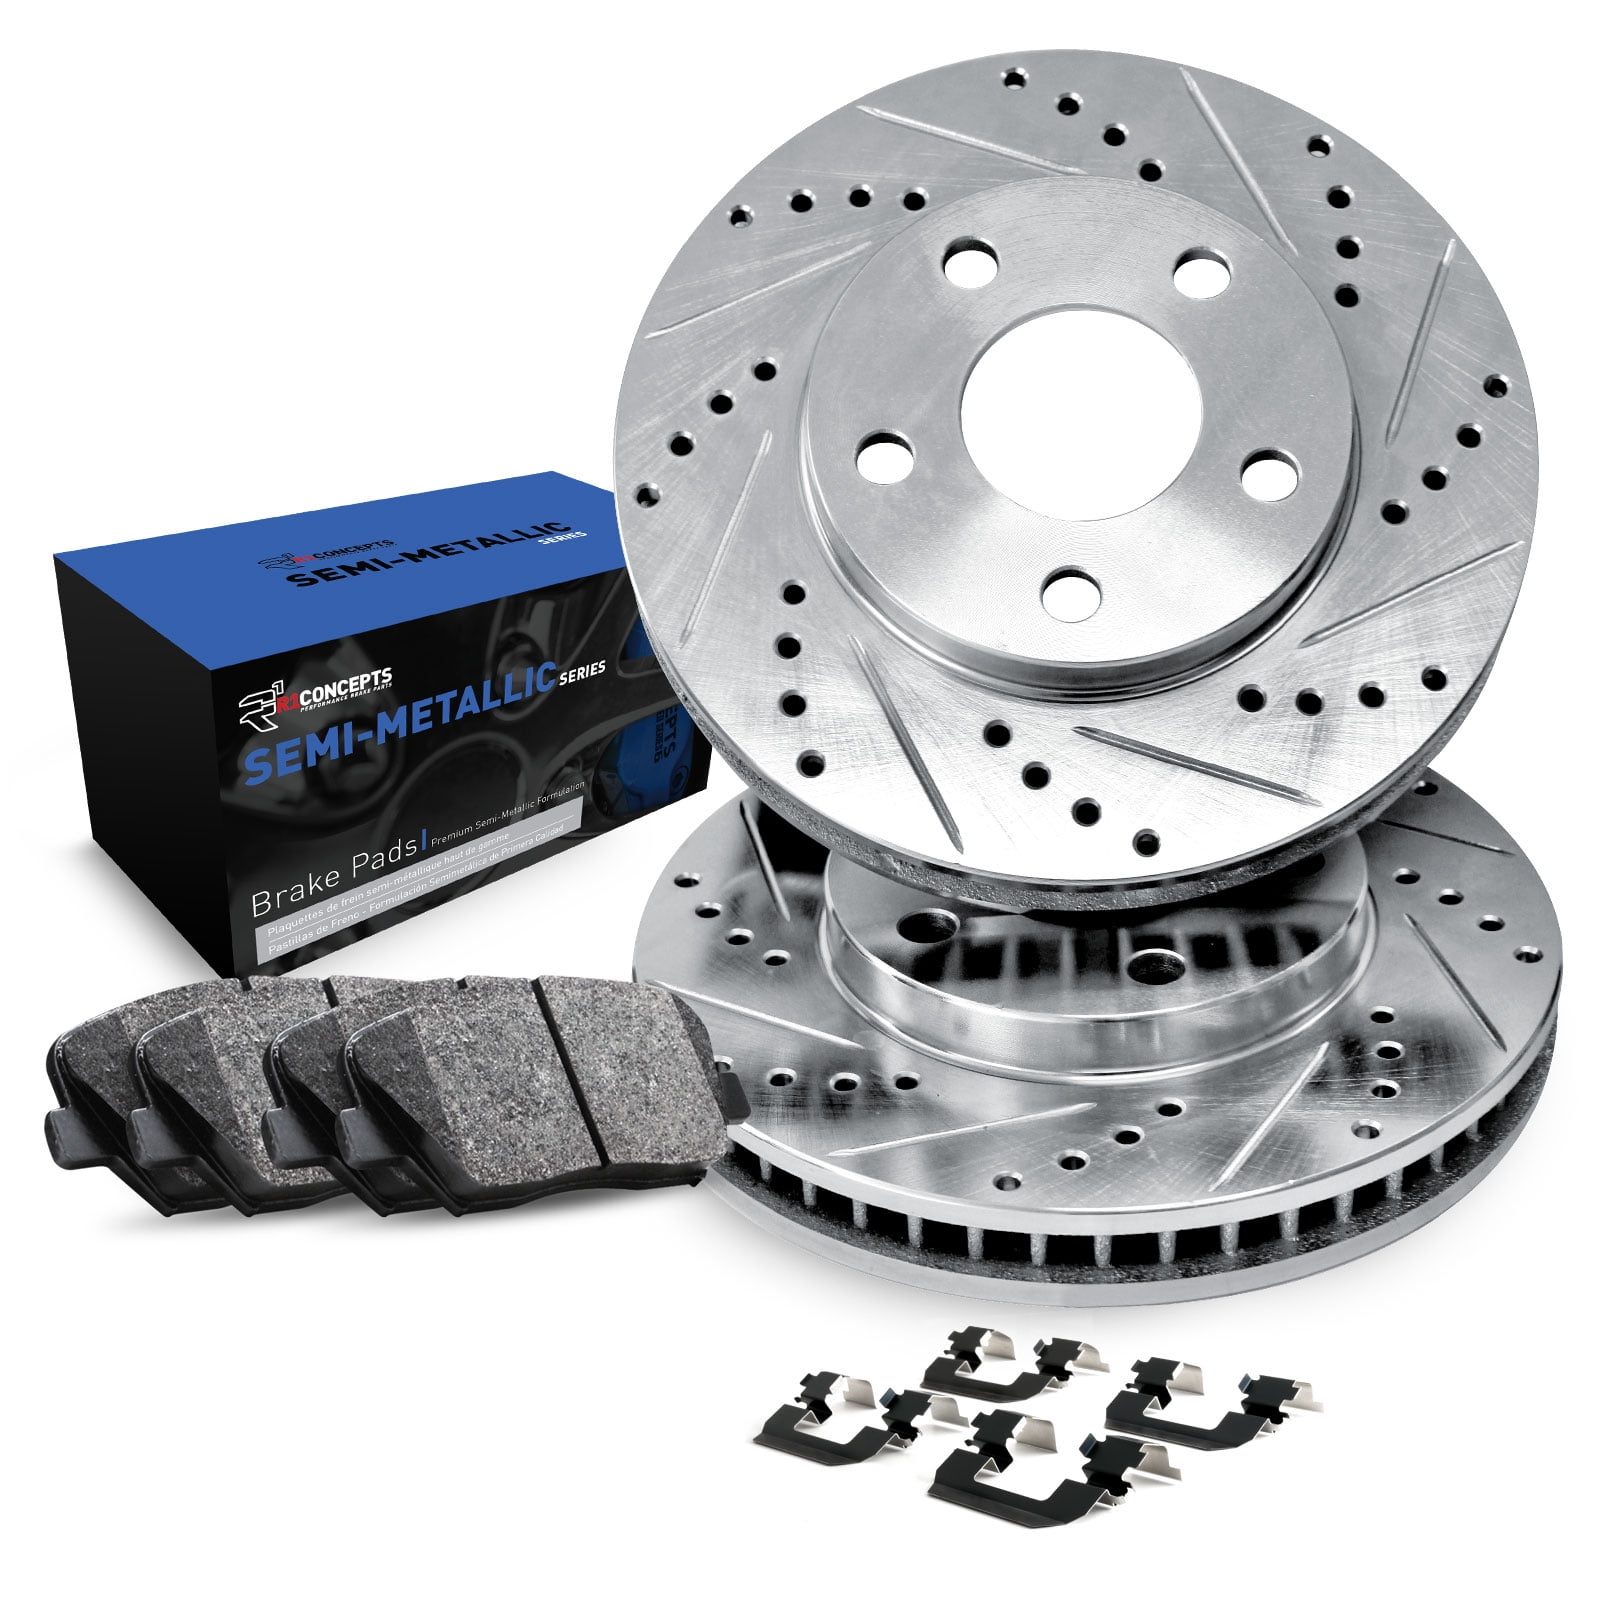 Premium Slotted Drilled Rotors + Ceramic Pads Max Brakes Front & Rear Performance Brake Kit KT059833 Fits: 2003 03 2004 04 2005 05 Ford Crown Victoria